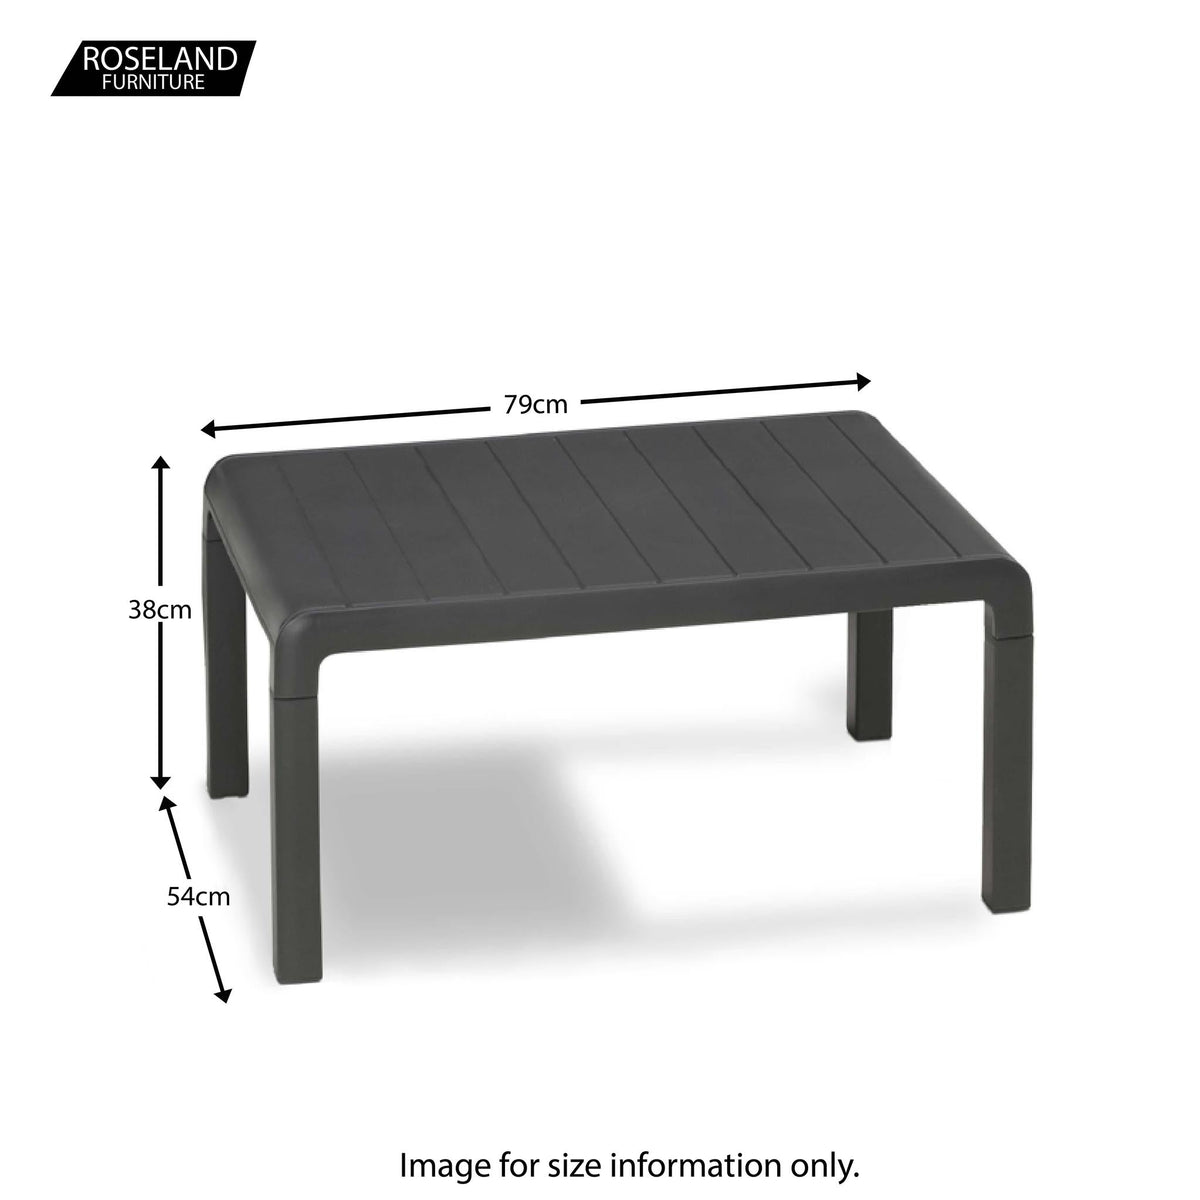 Allibert Balcony Set - Size Guide for Table